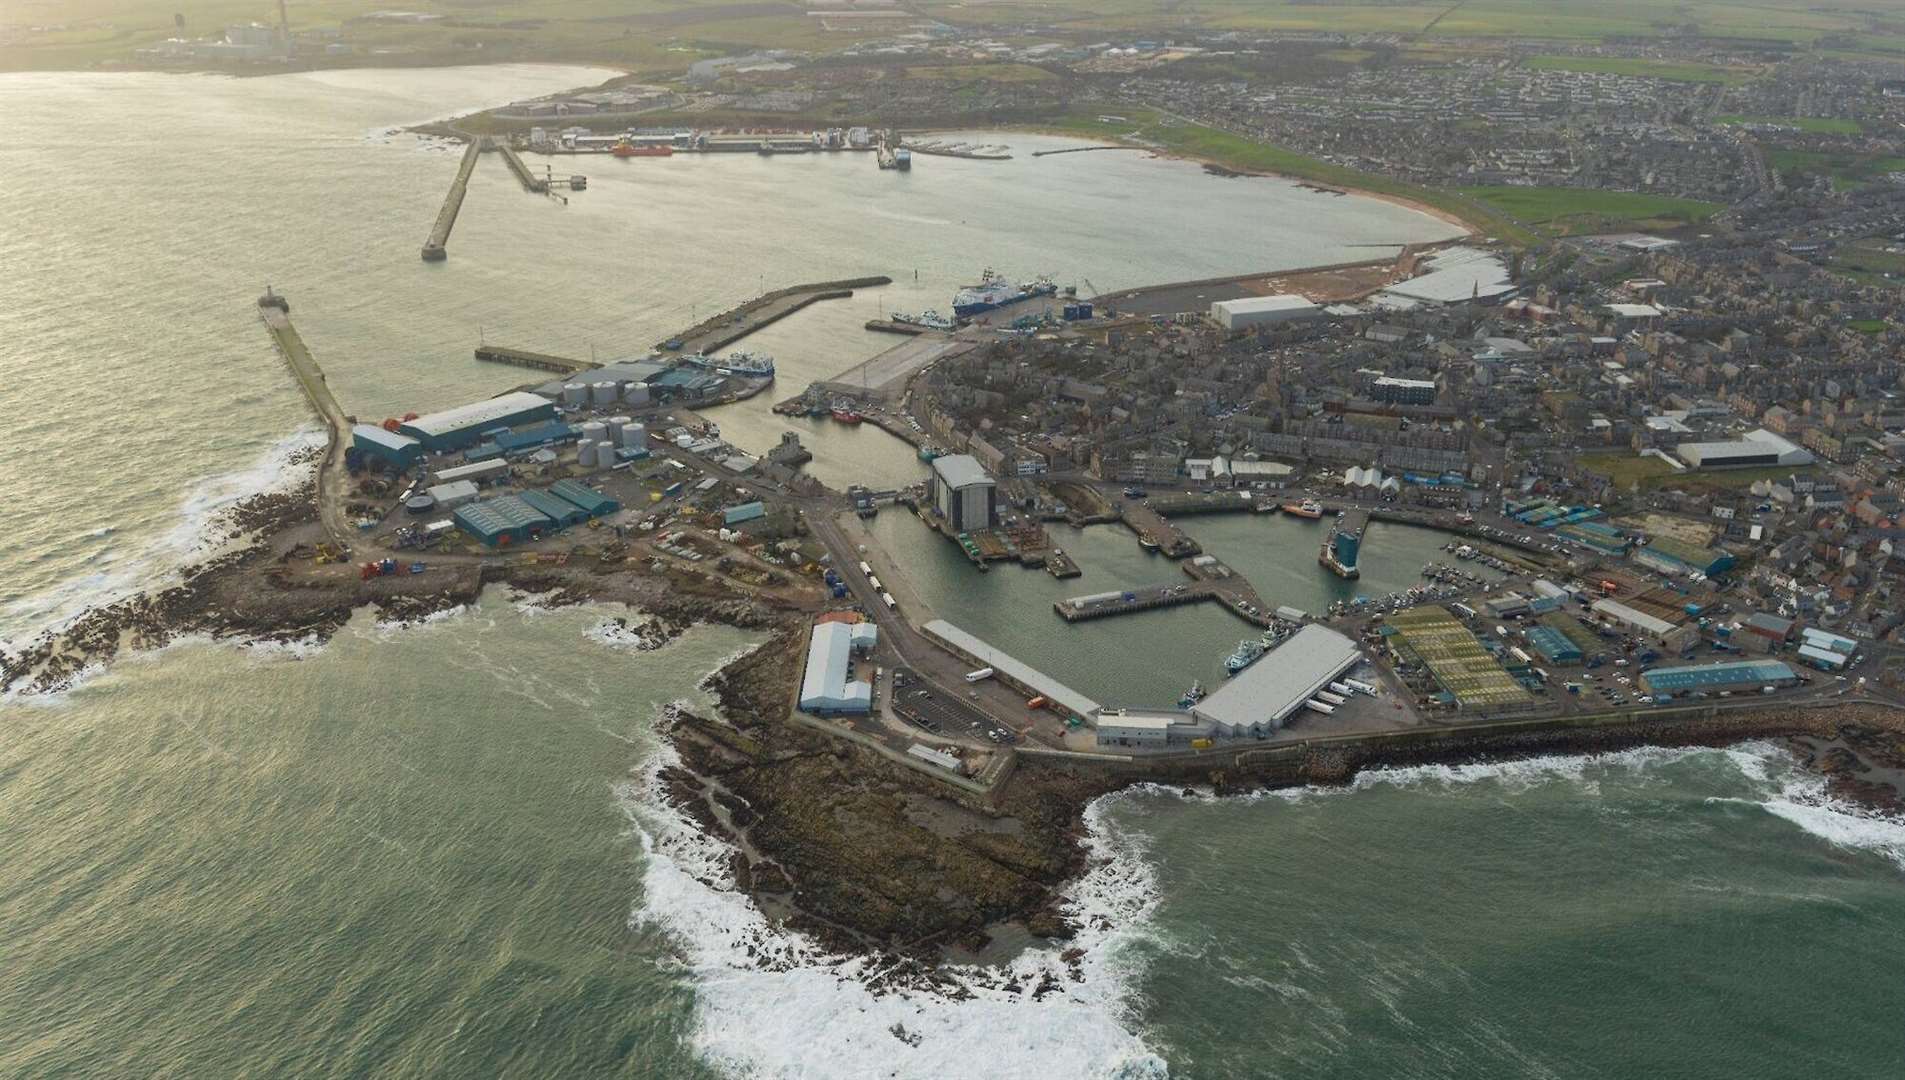 A bid has been submitted for Peterhead to gain Freeport status